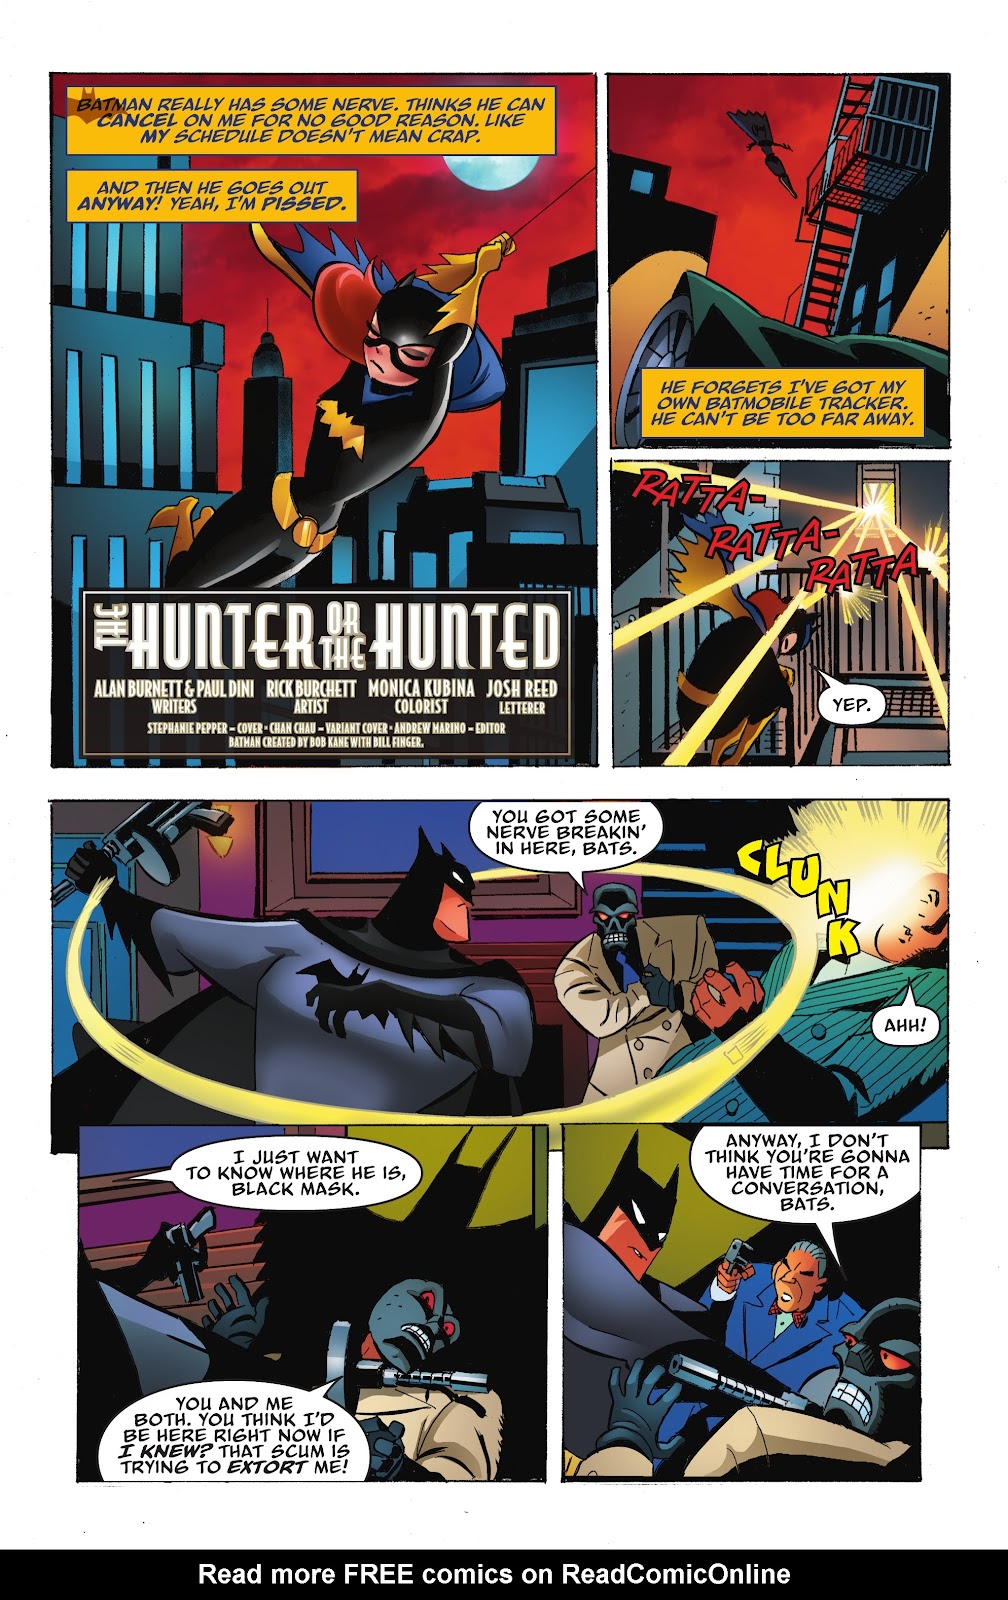 Batman: The Adventures Continue: Season Two issue 3 - Page 3